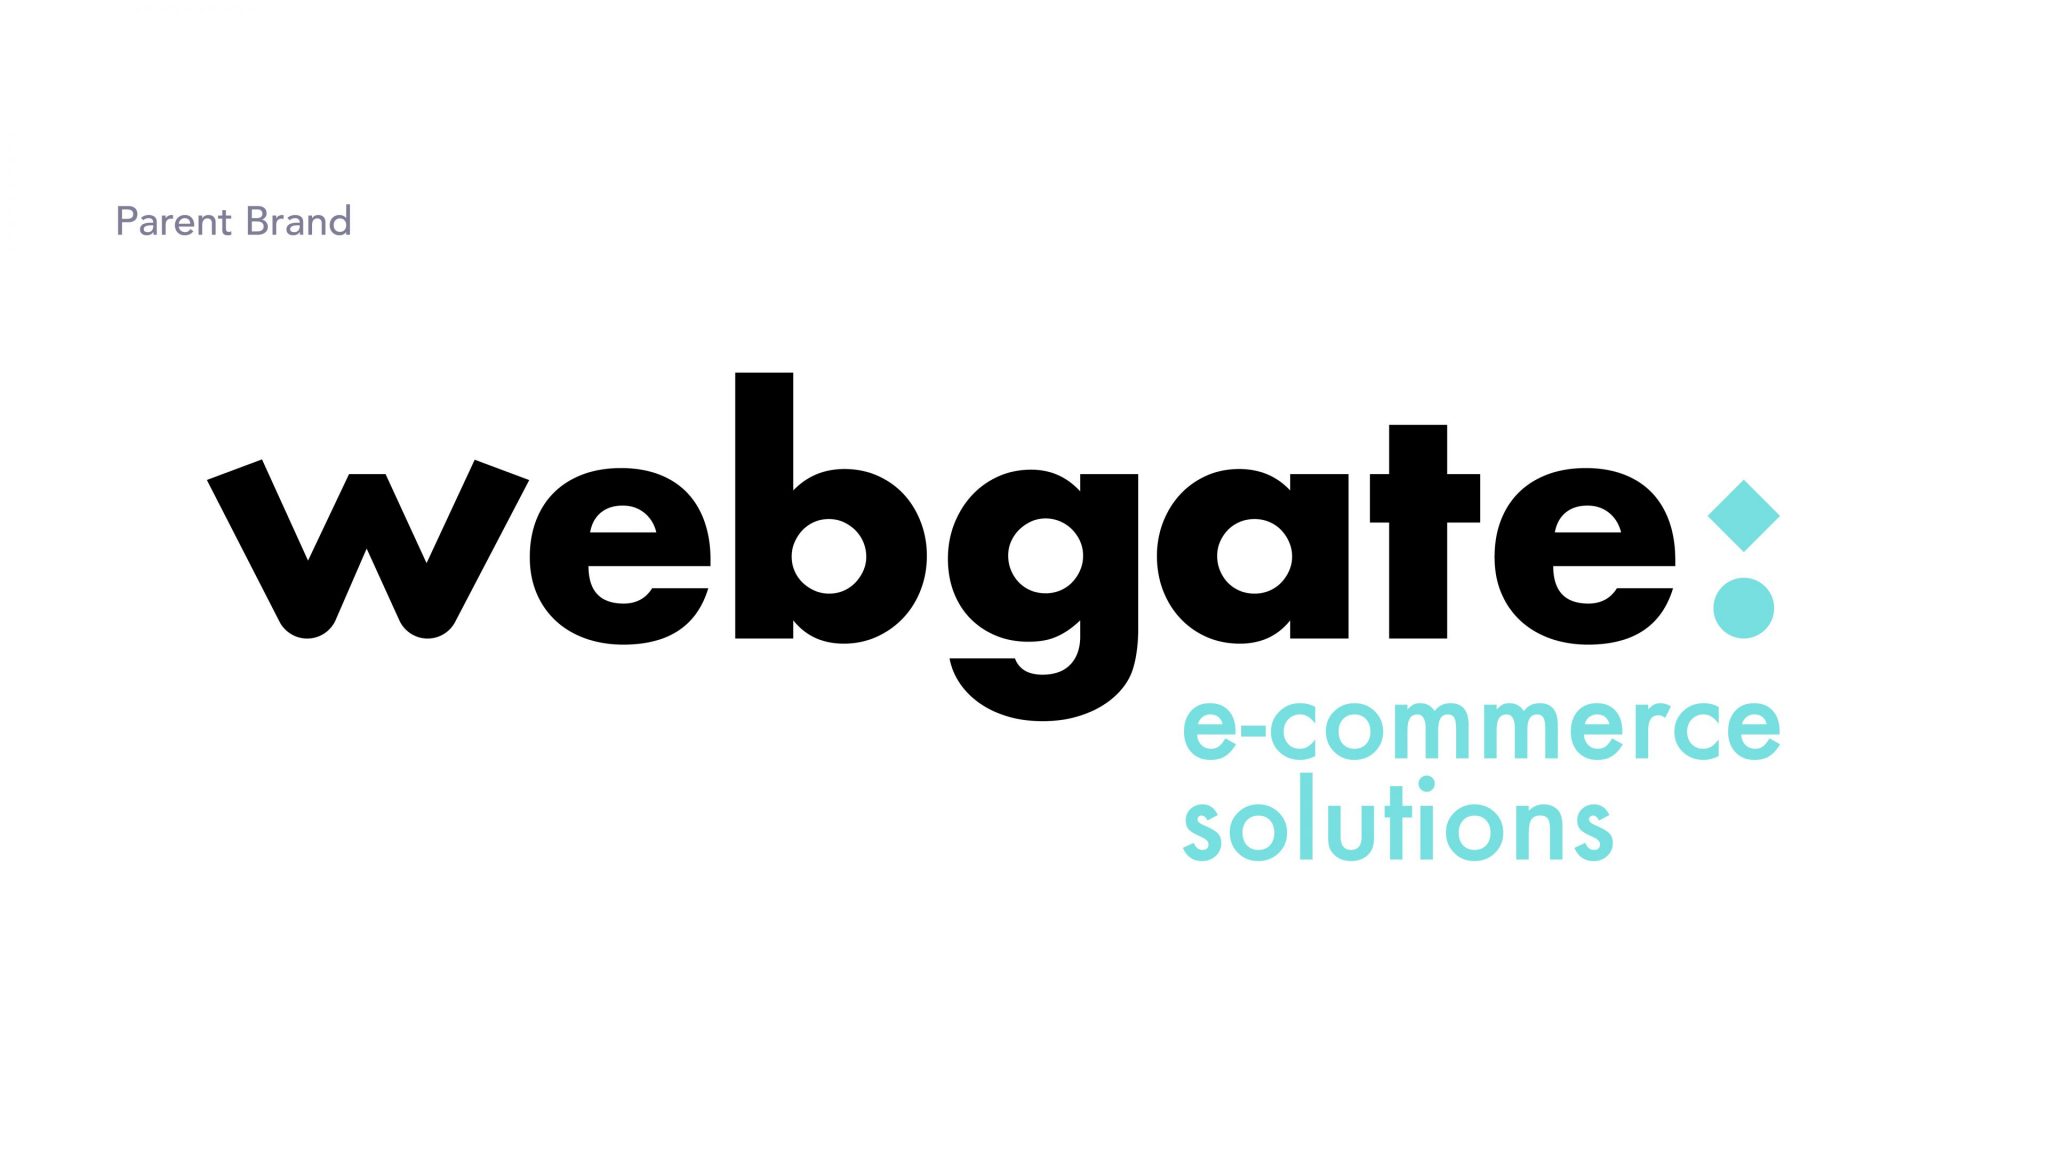 Webgate new brand identity and positioning in their brand map